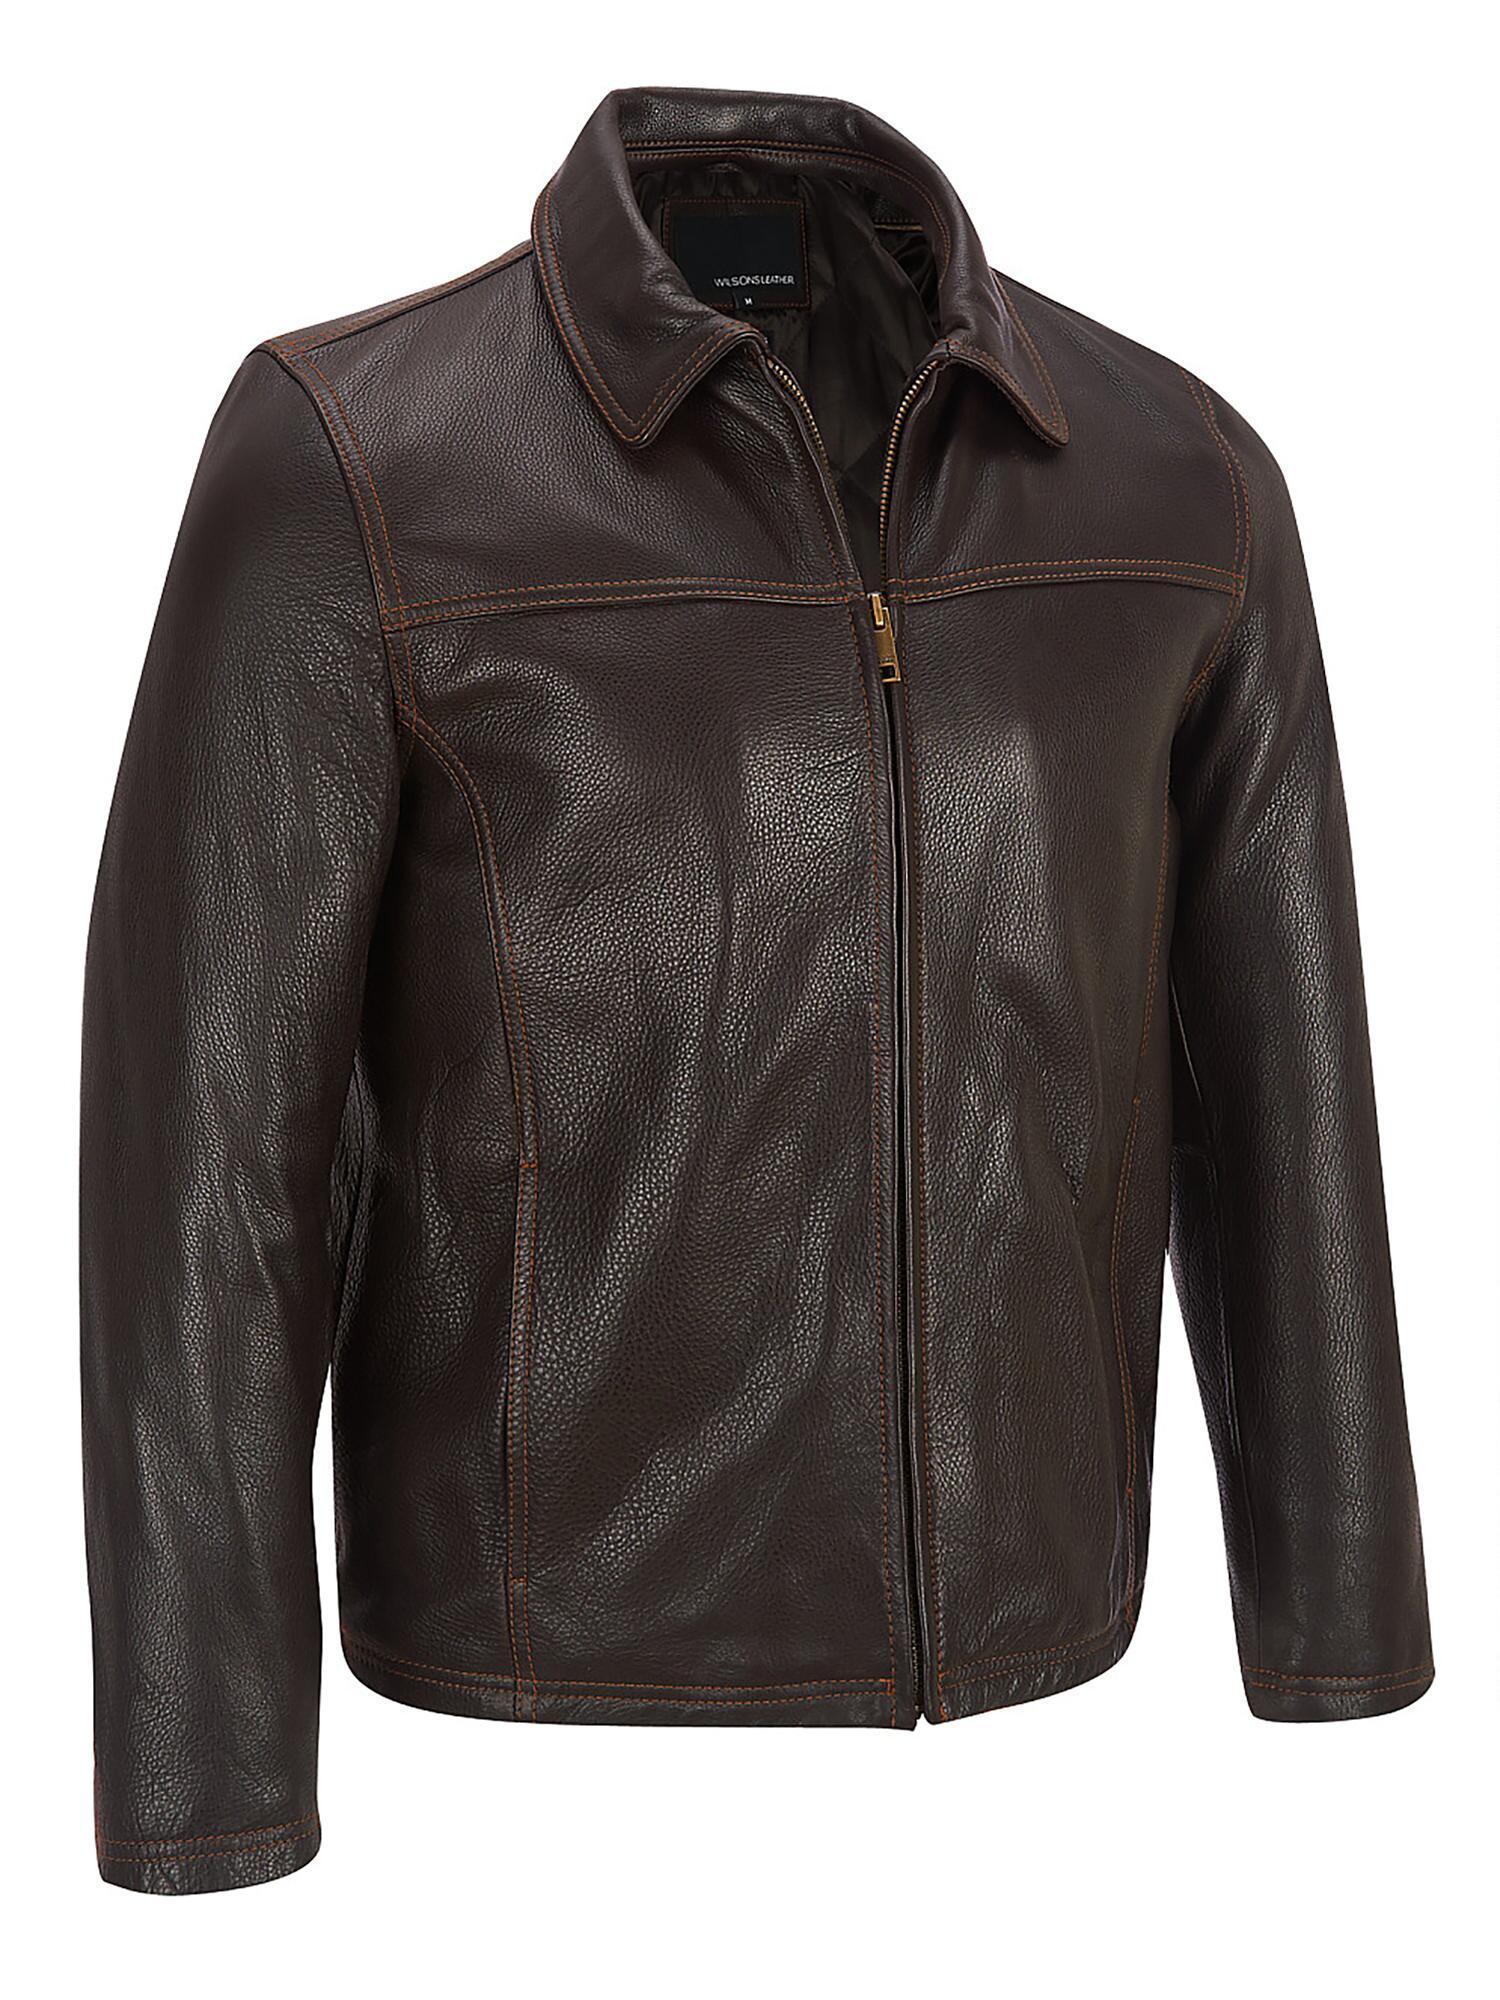 Wilsons Leather Big & Tall Leather Jacket With Thinsulatetm Lining in